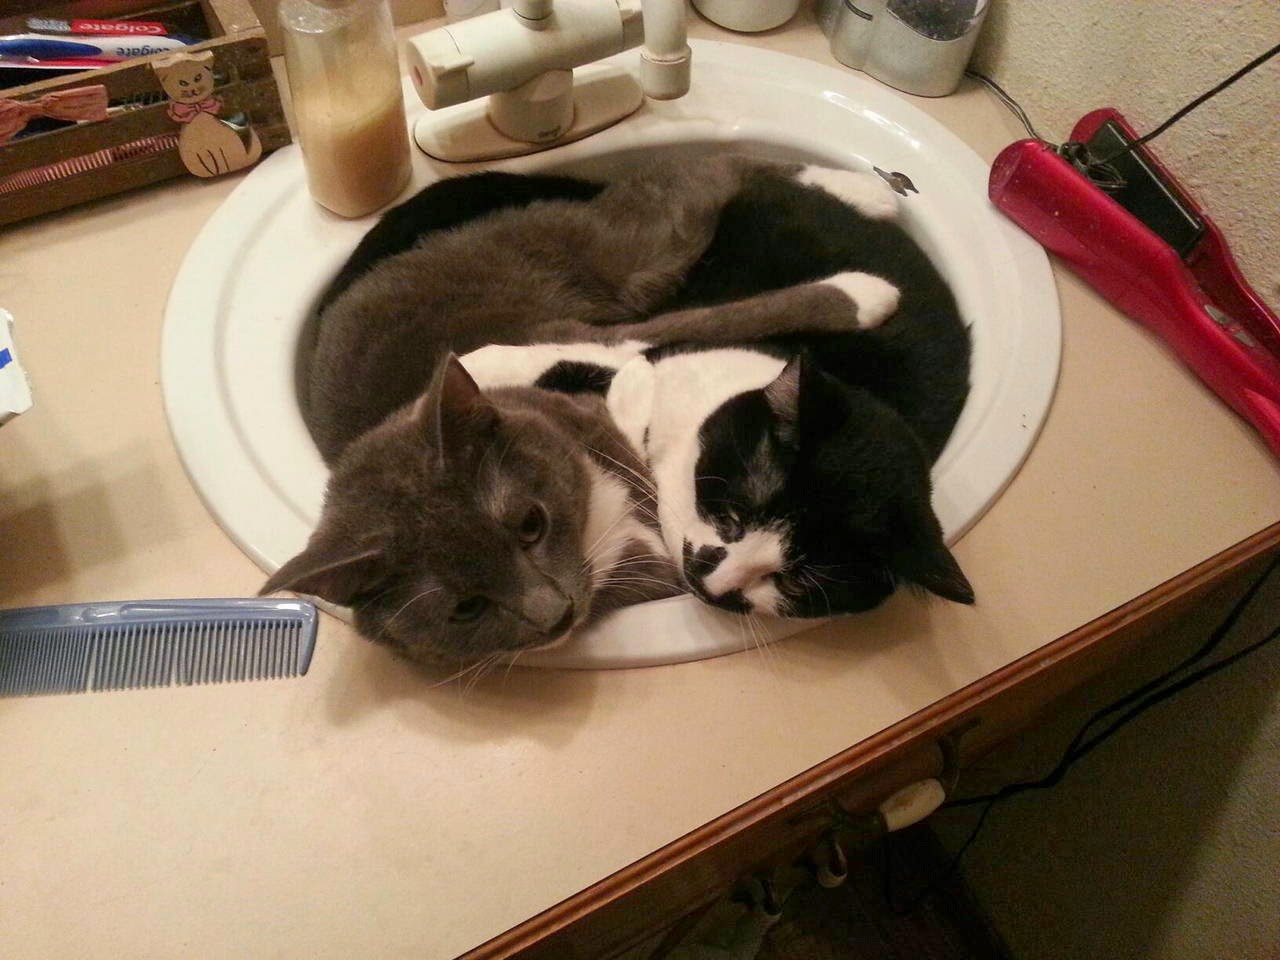 Funny cats - part 95 (40 pics + 10 gifs), cat pictures, two cats snuggling in a sink